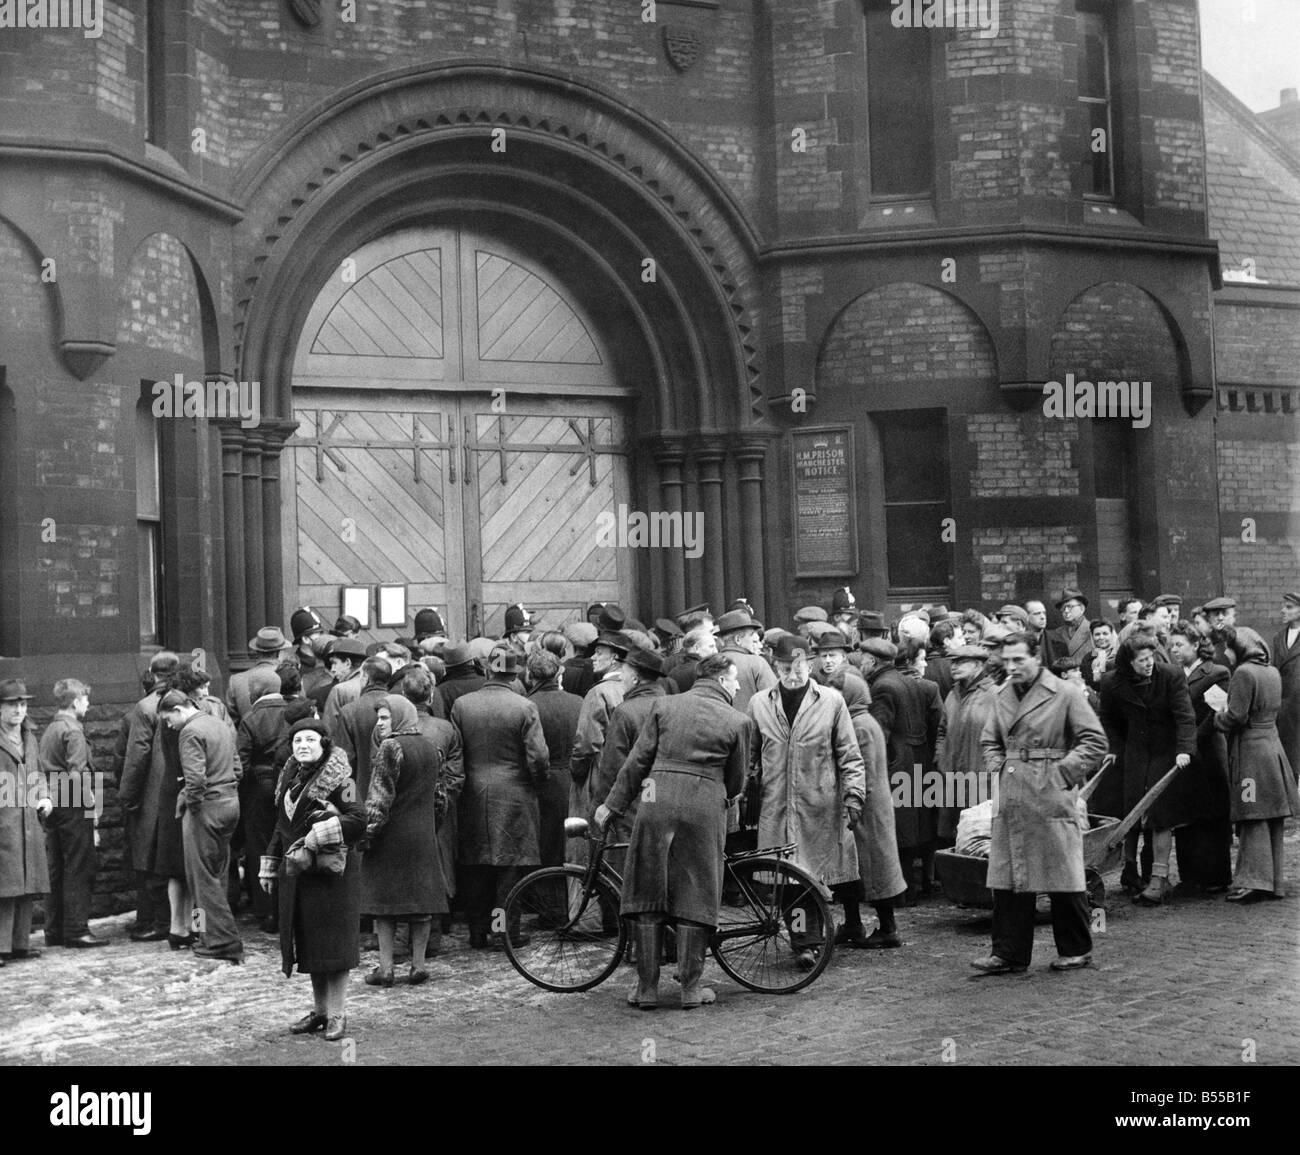 Walter Rowland execution at Strangeways prison. The crowd rush forward to read the death notice hung on the prison gate after the execution. While he had been awaiting execution, another man had confessed to the crime. A Home Office report dismissed this manÍs confession as false, but in 1951 the man attacked another woman and was found guilty but insane. February 1947 P012624 Stock Photo